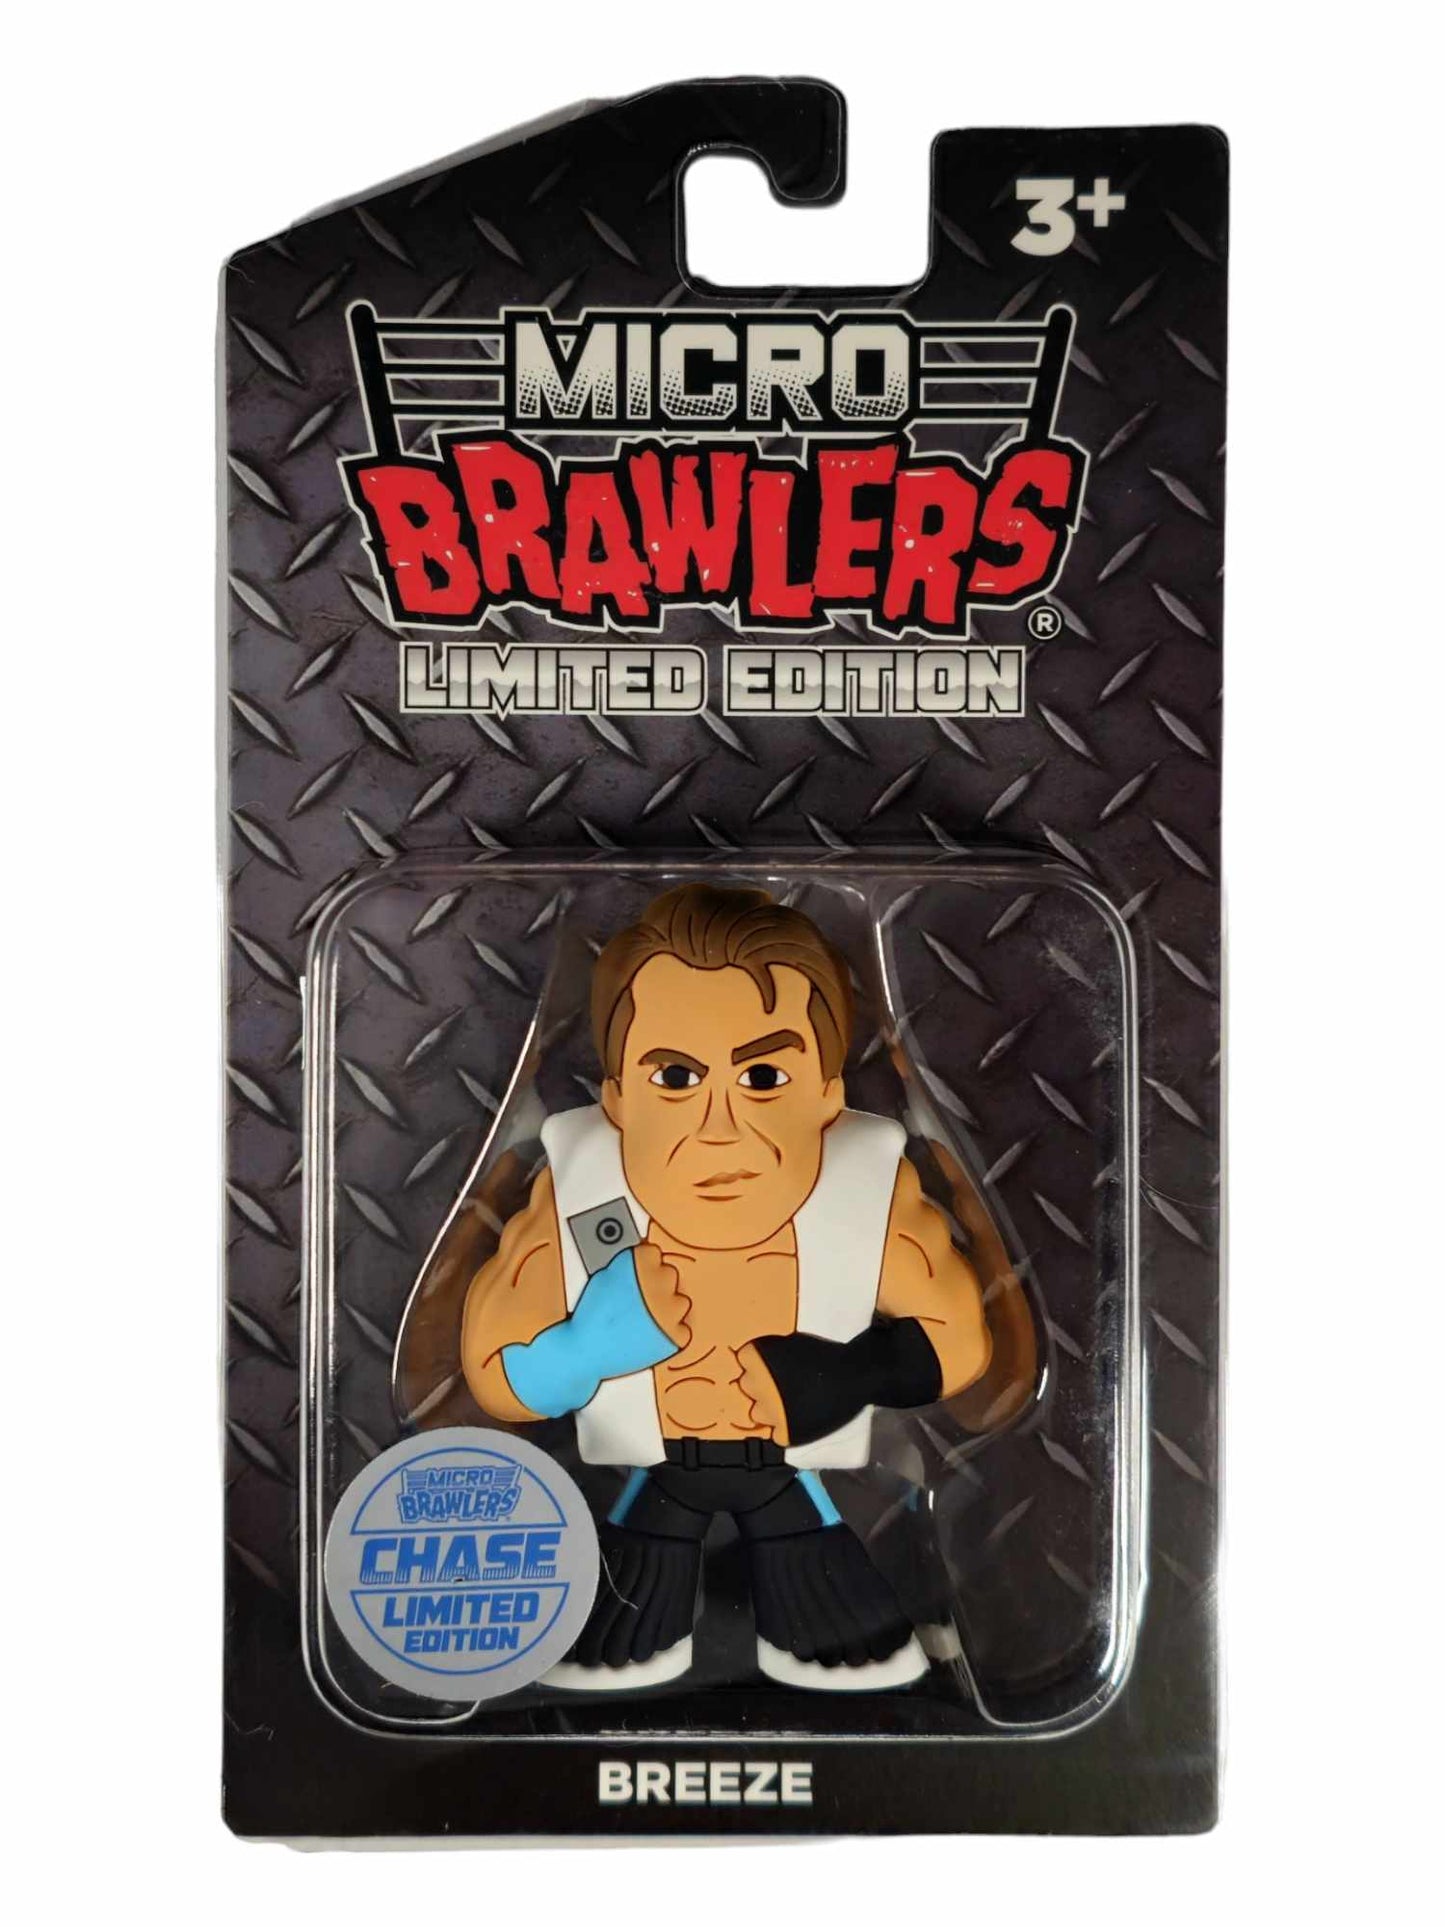 2023 Pro Wrestling Tees Limited Edition Micro Brawler Breeze